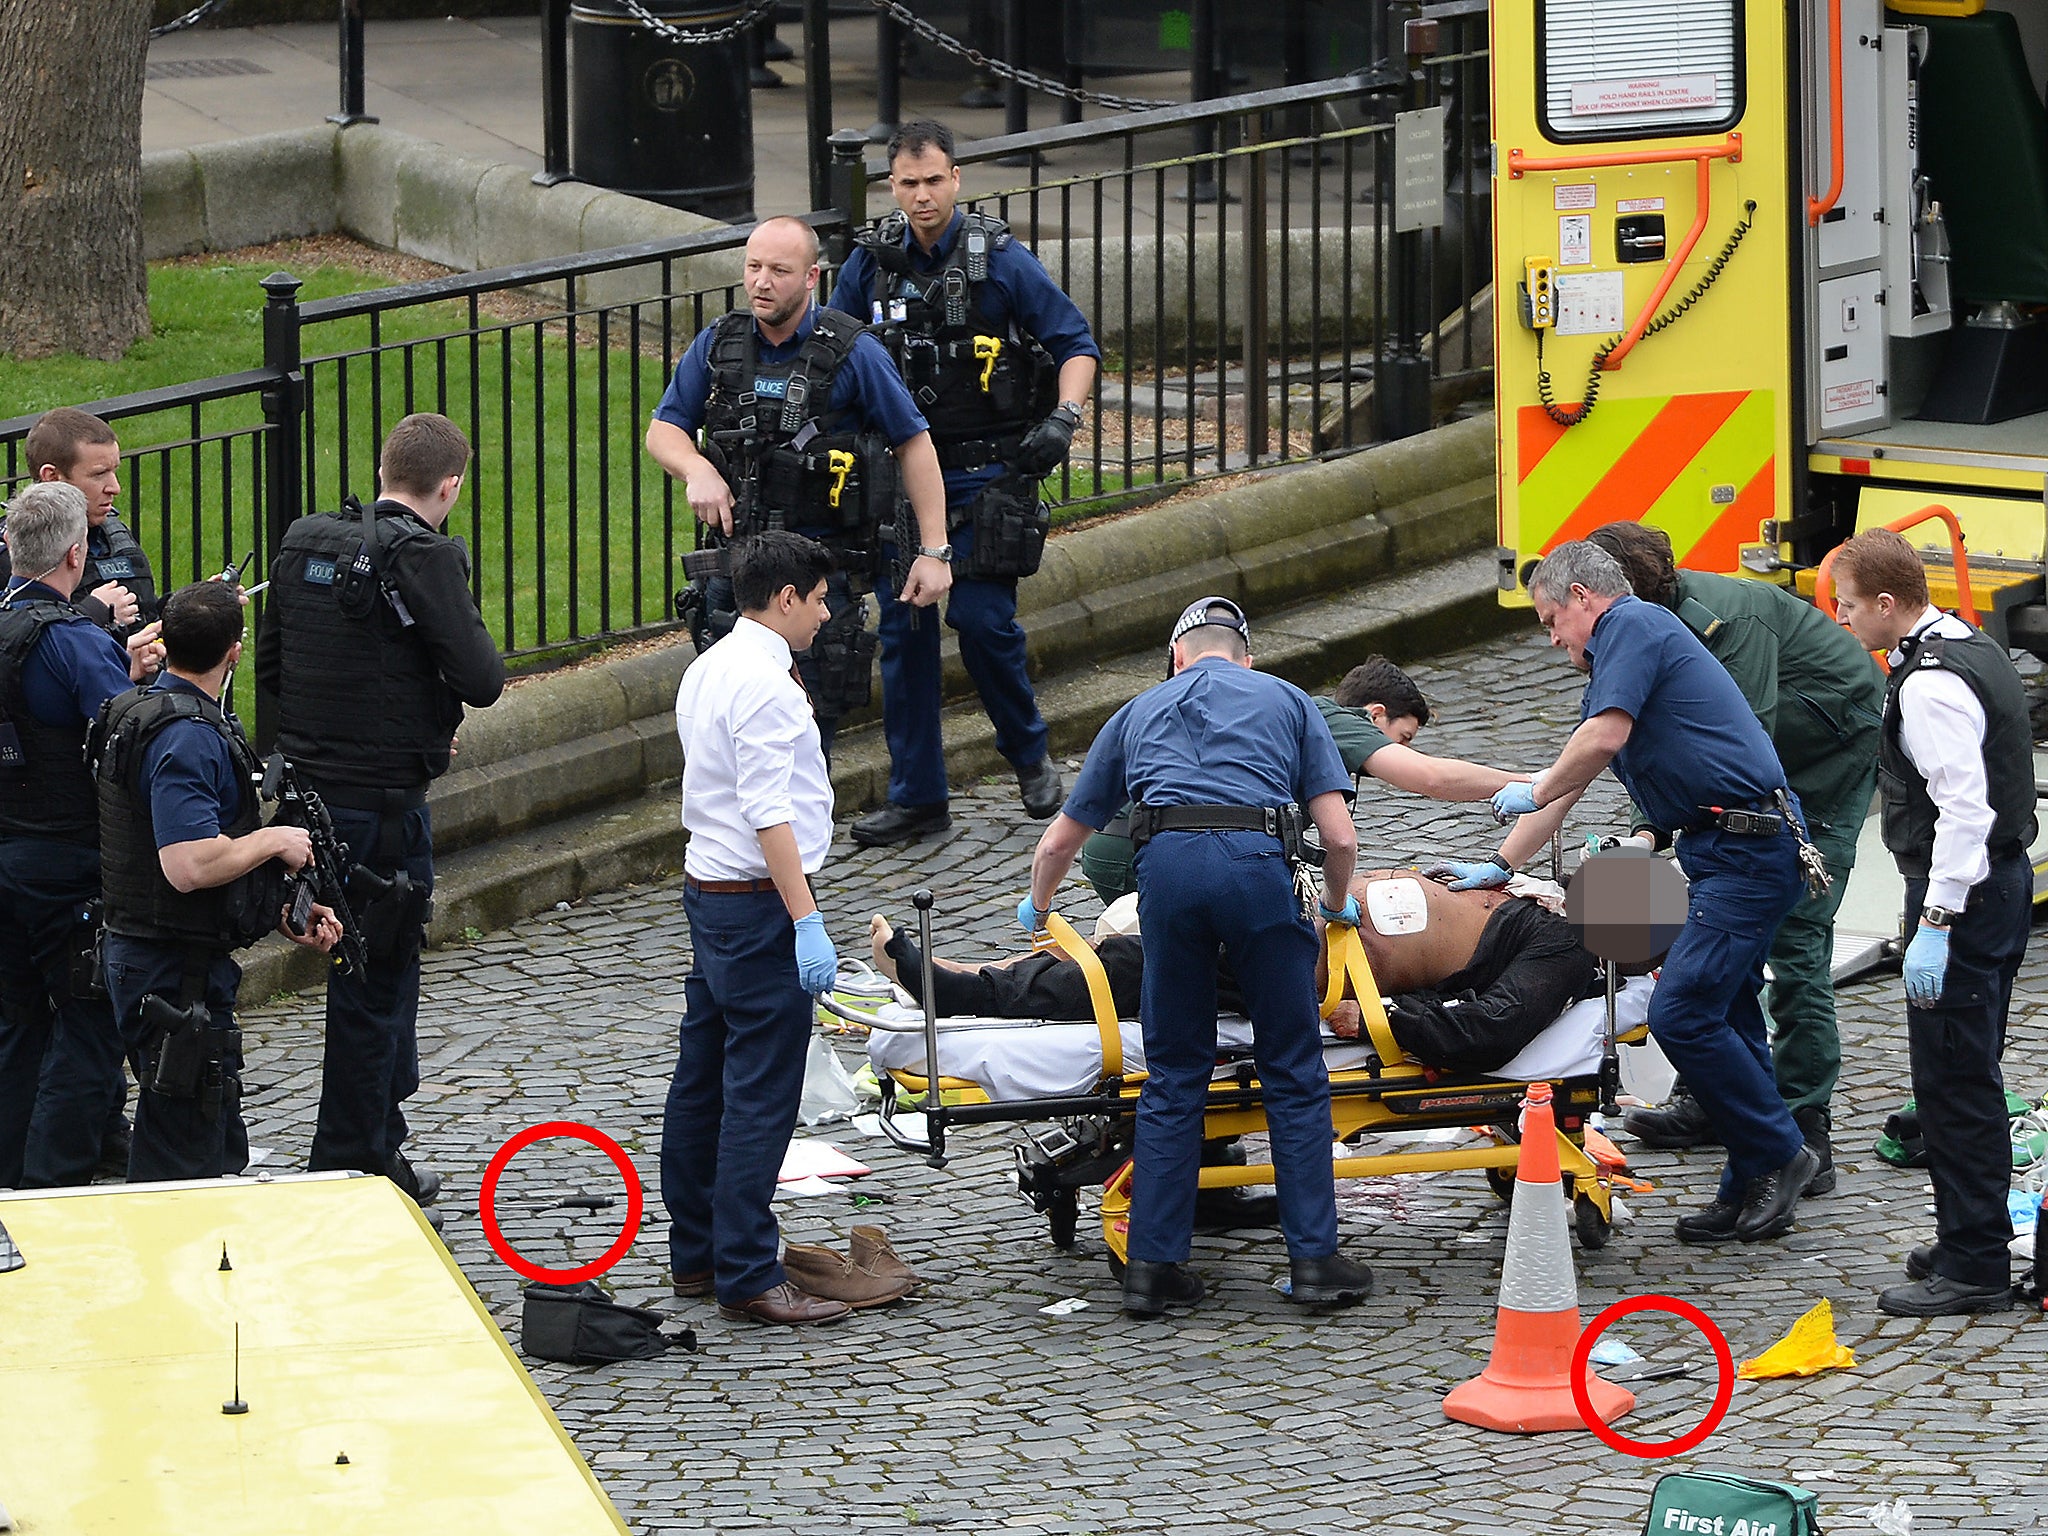 Two knives, circled in red, lay on the floor near the suspect